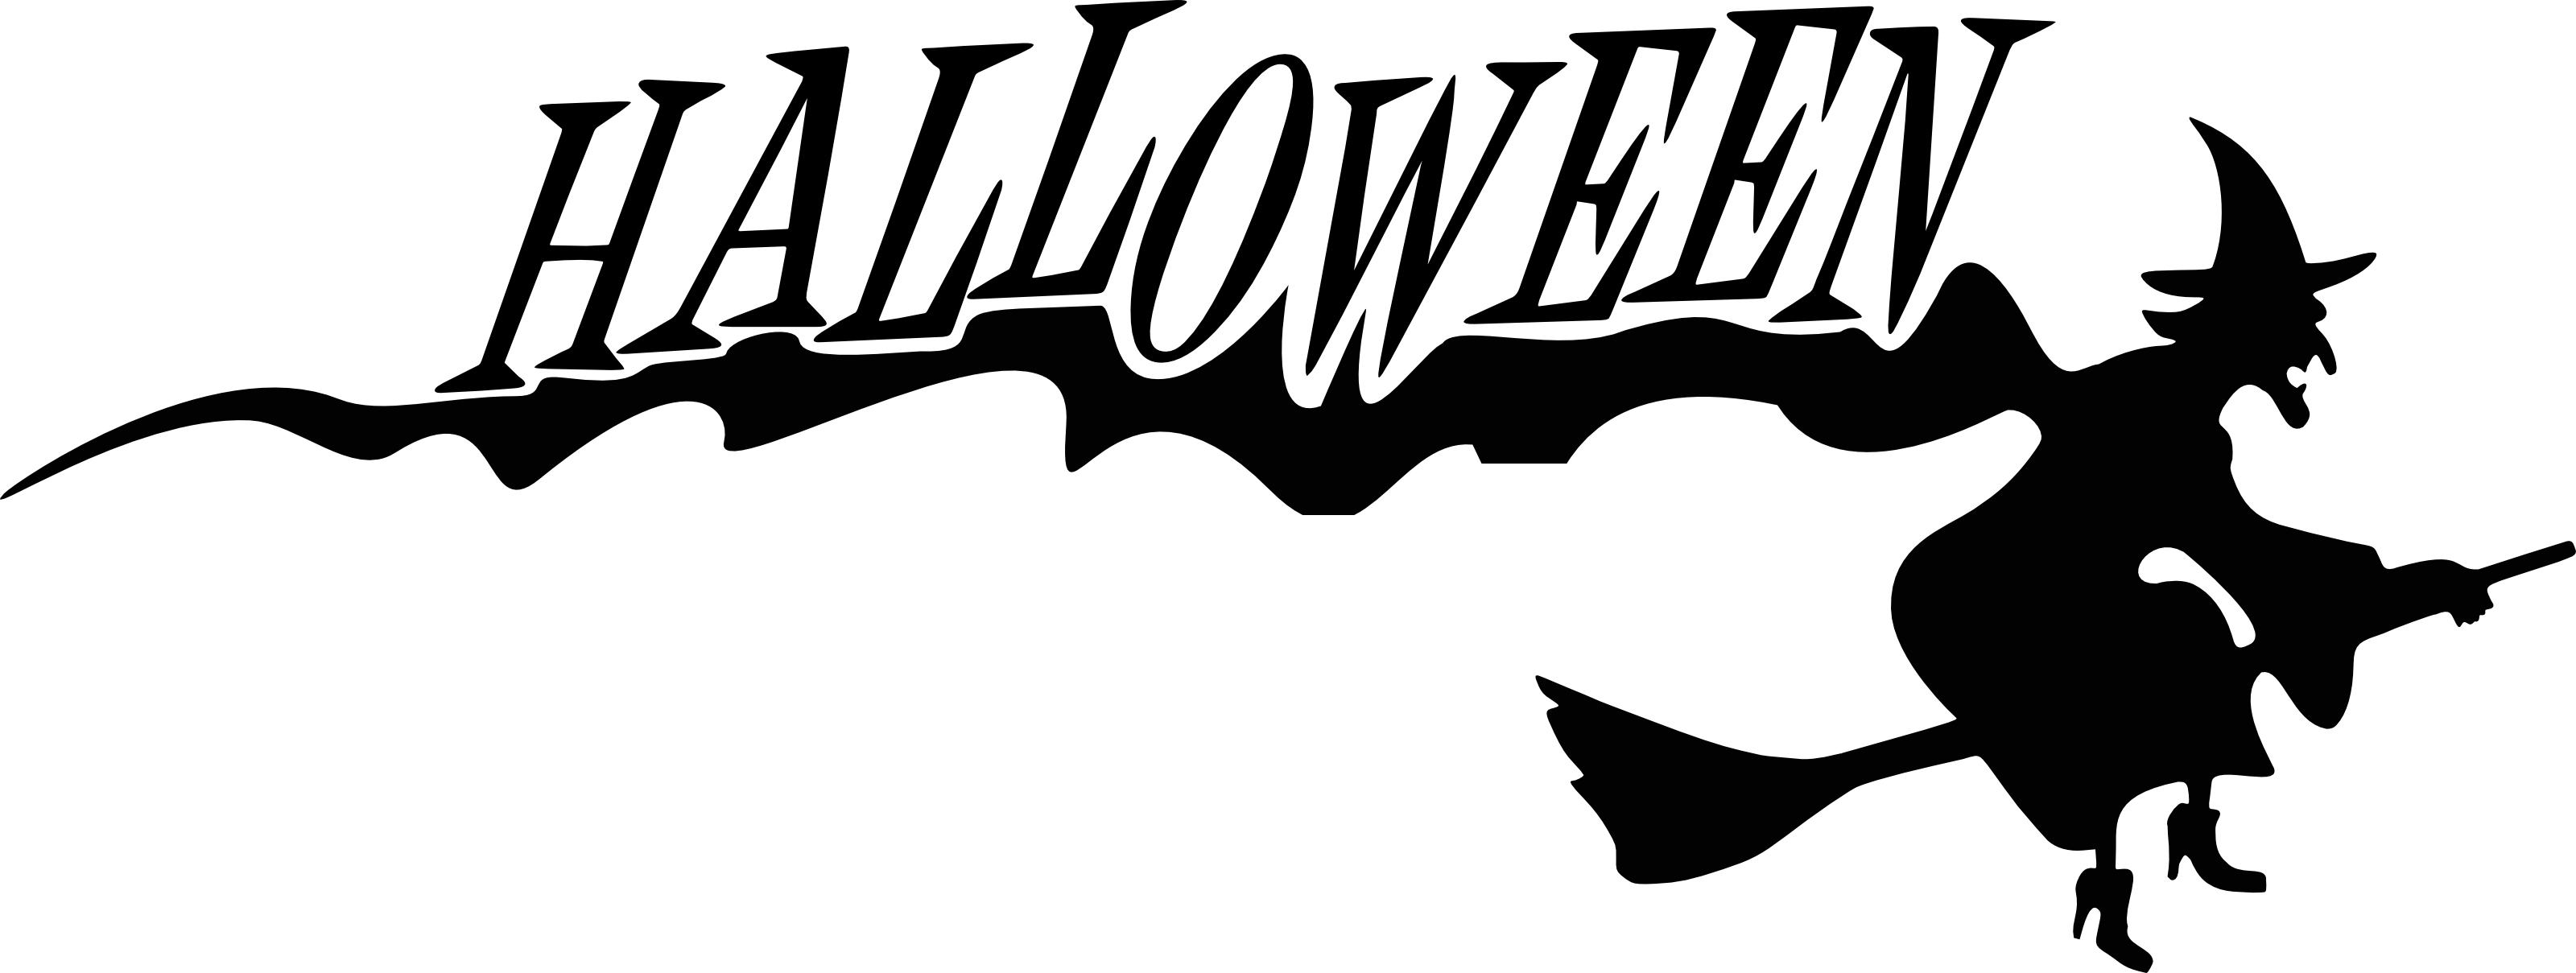 free halloween clip art images - photo #36